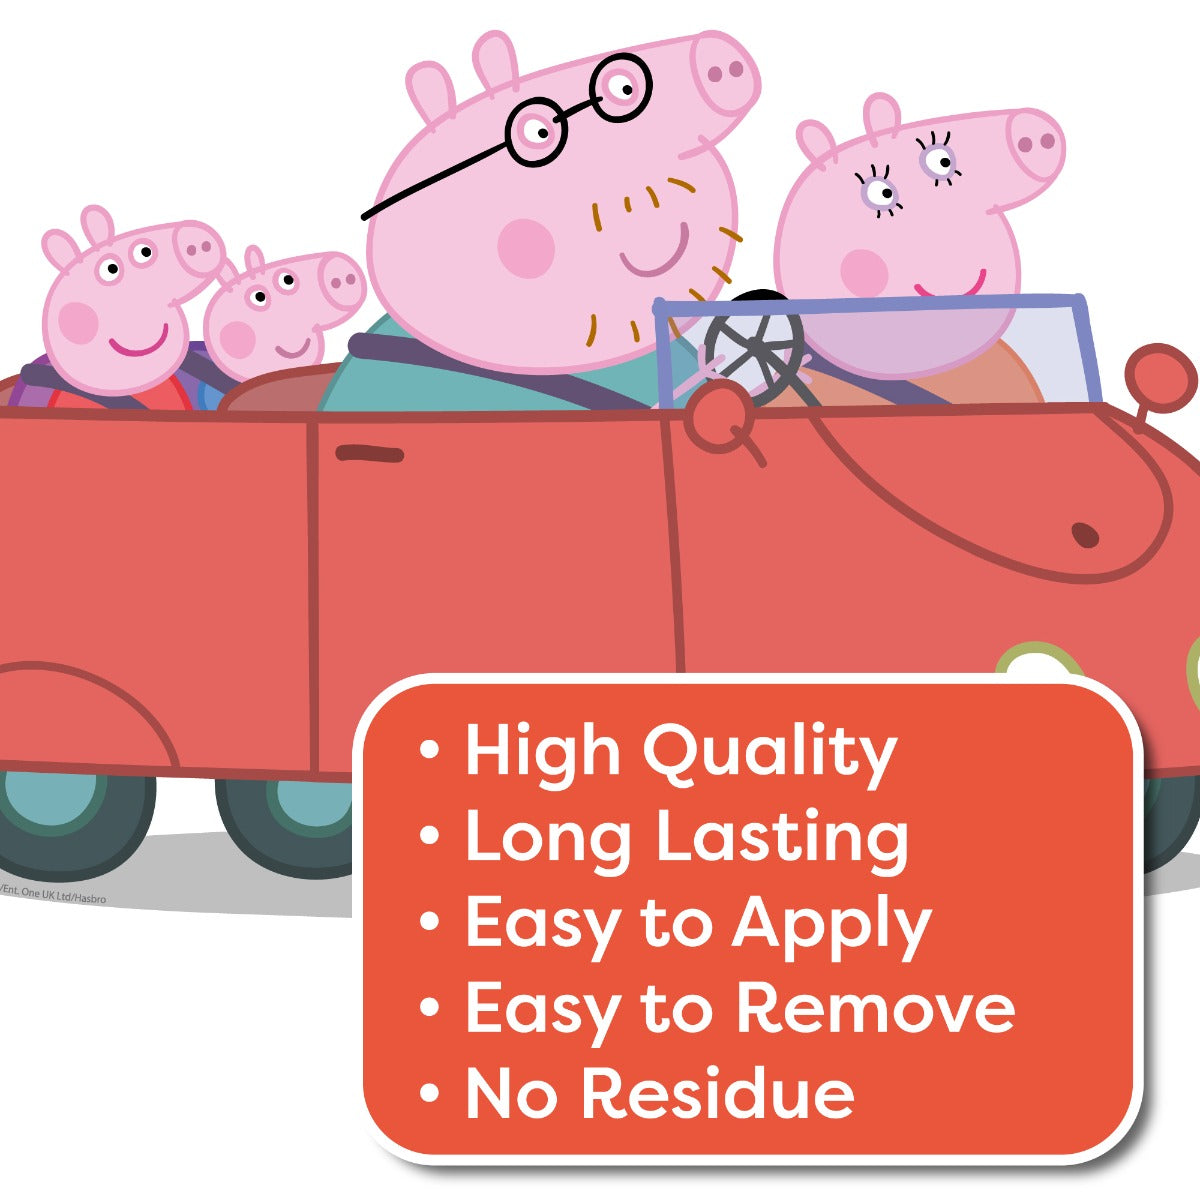 Peppa Pig Wall Sticker - Peppa and Family In Car